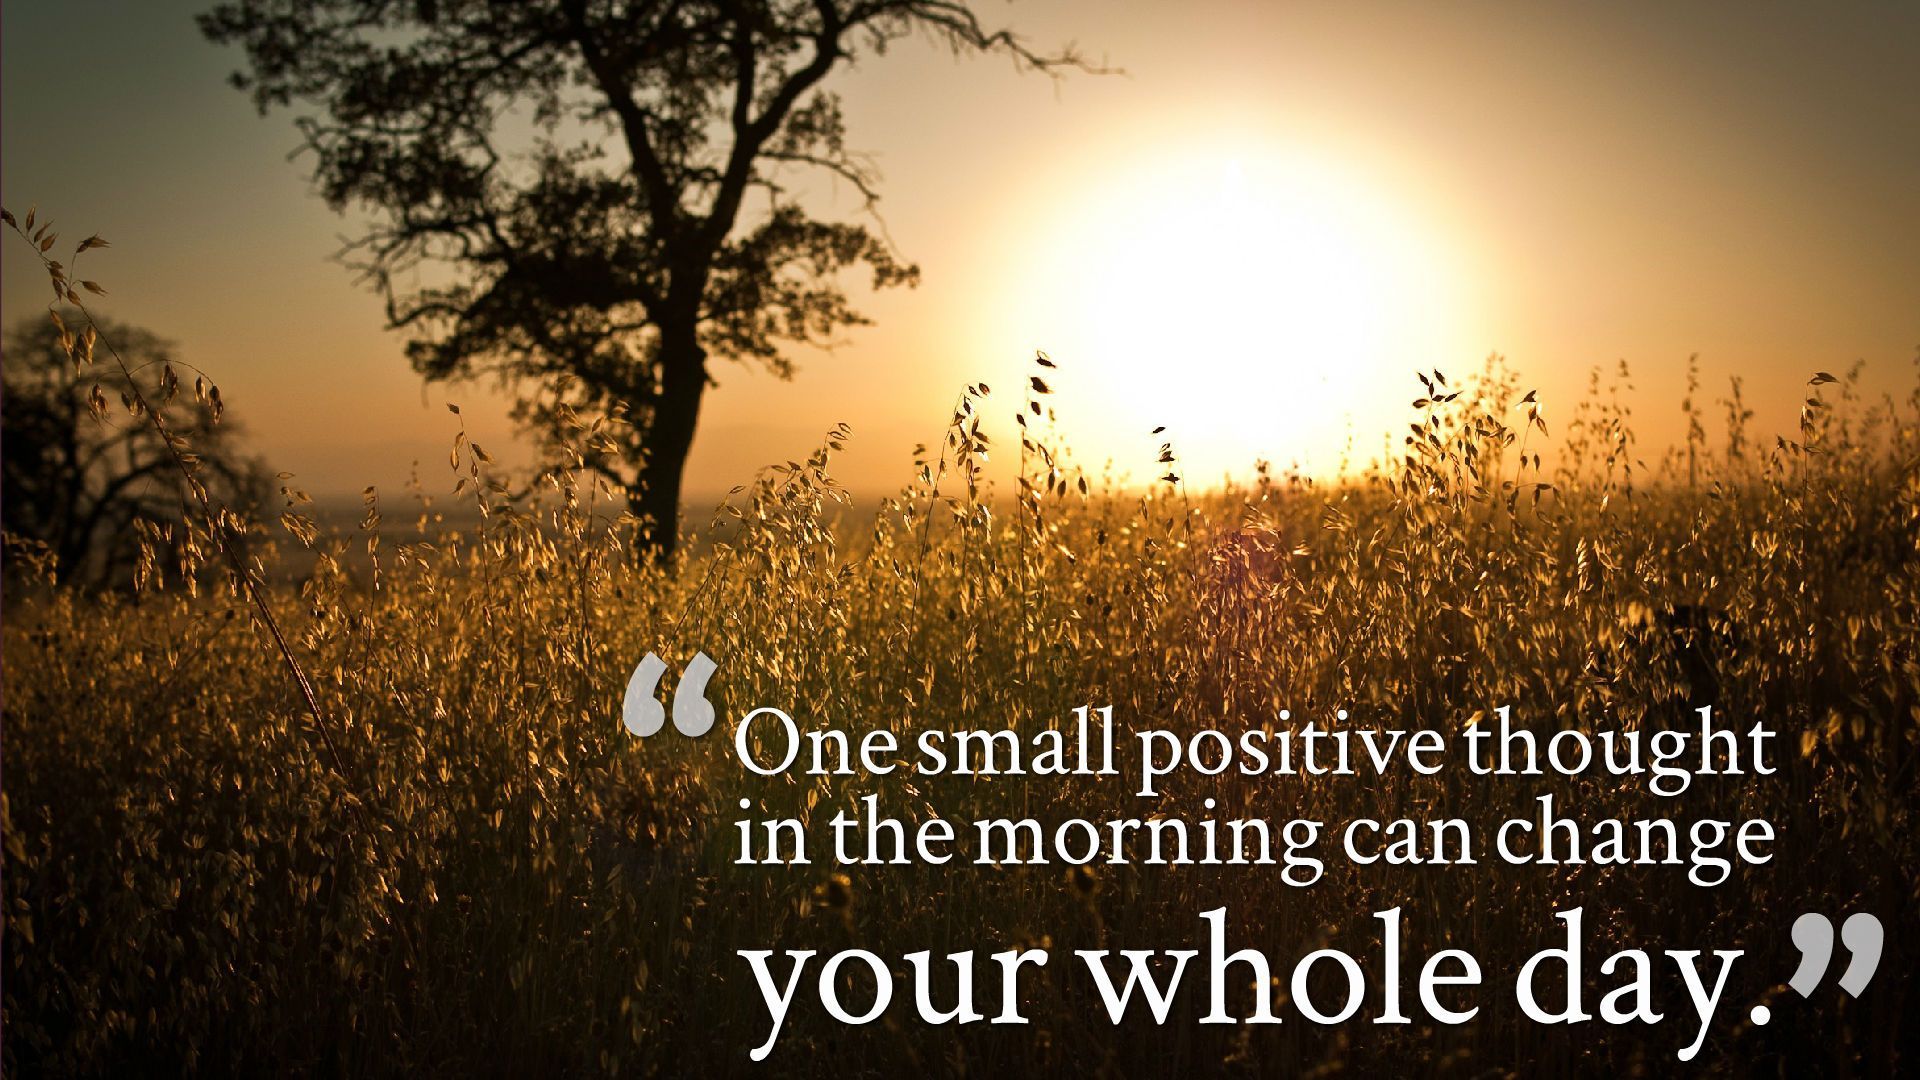 BEST INSPIRATIONAL MORNING QUOTES TO MAKE YOUR DAY. Morning